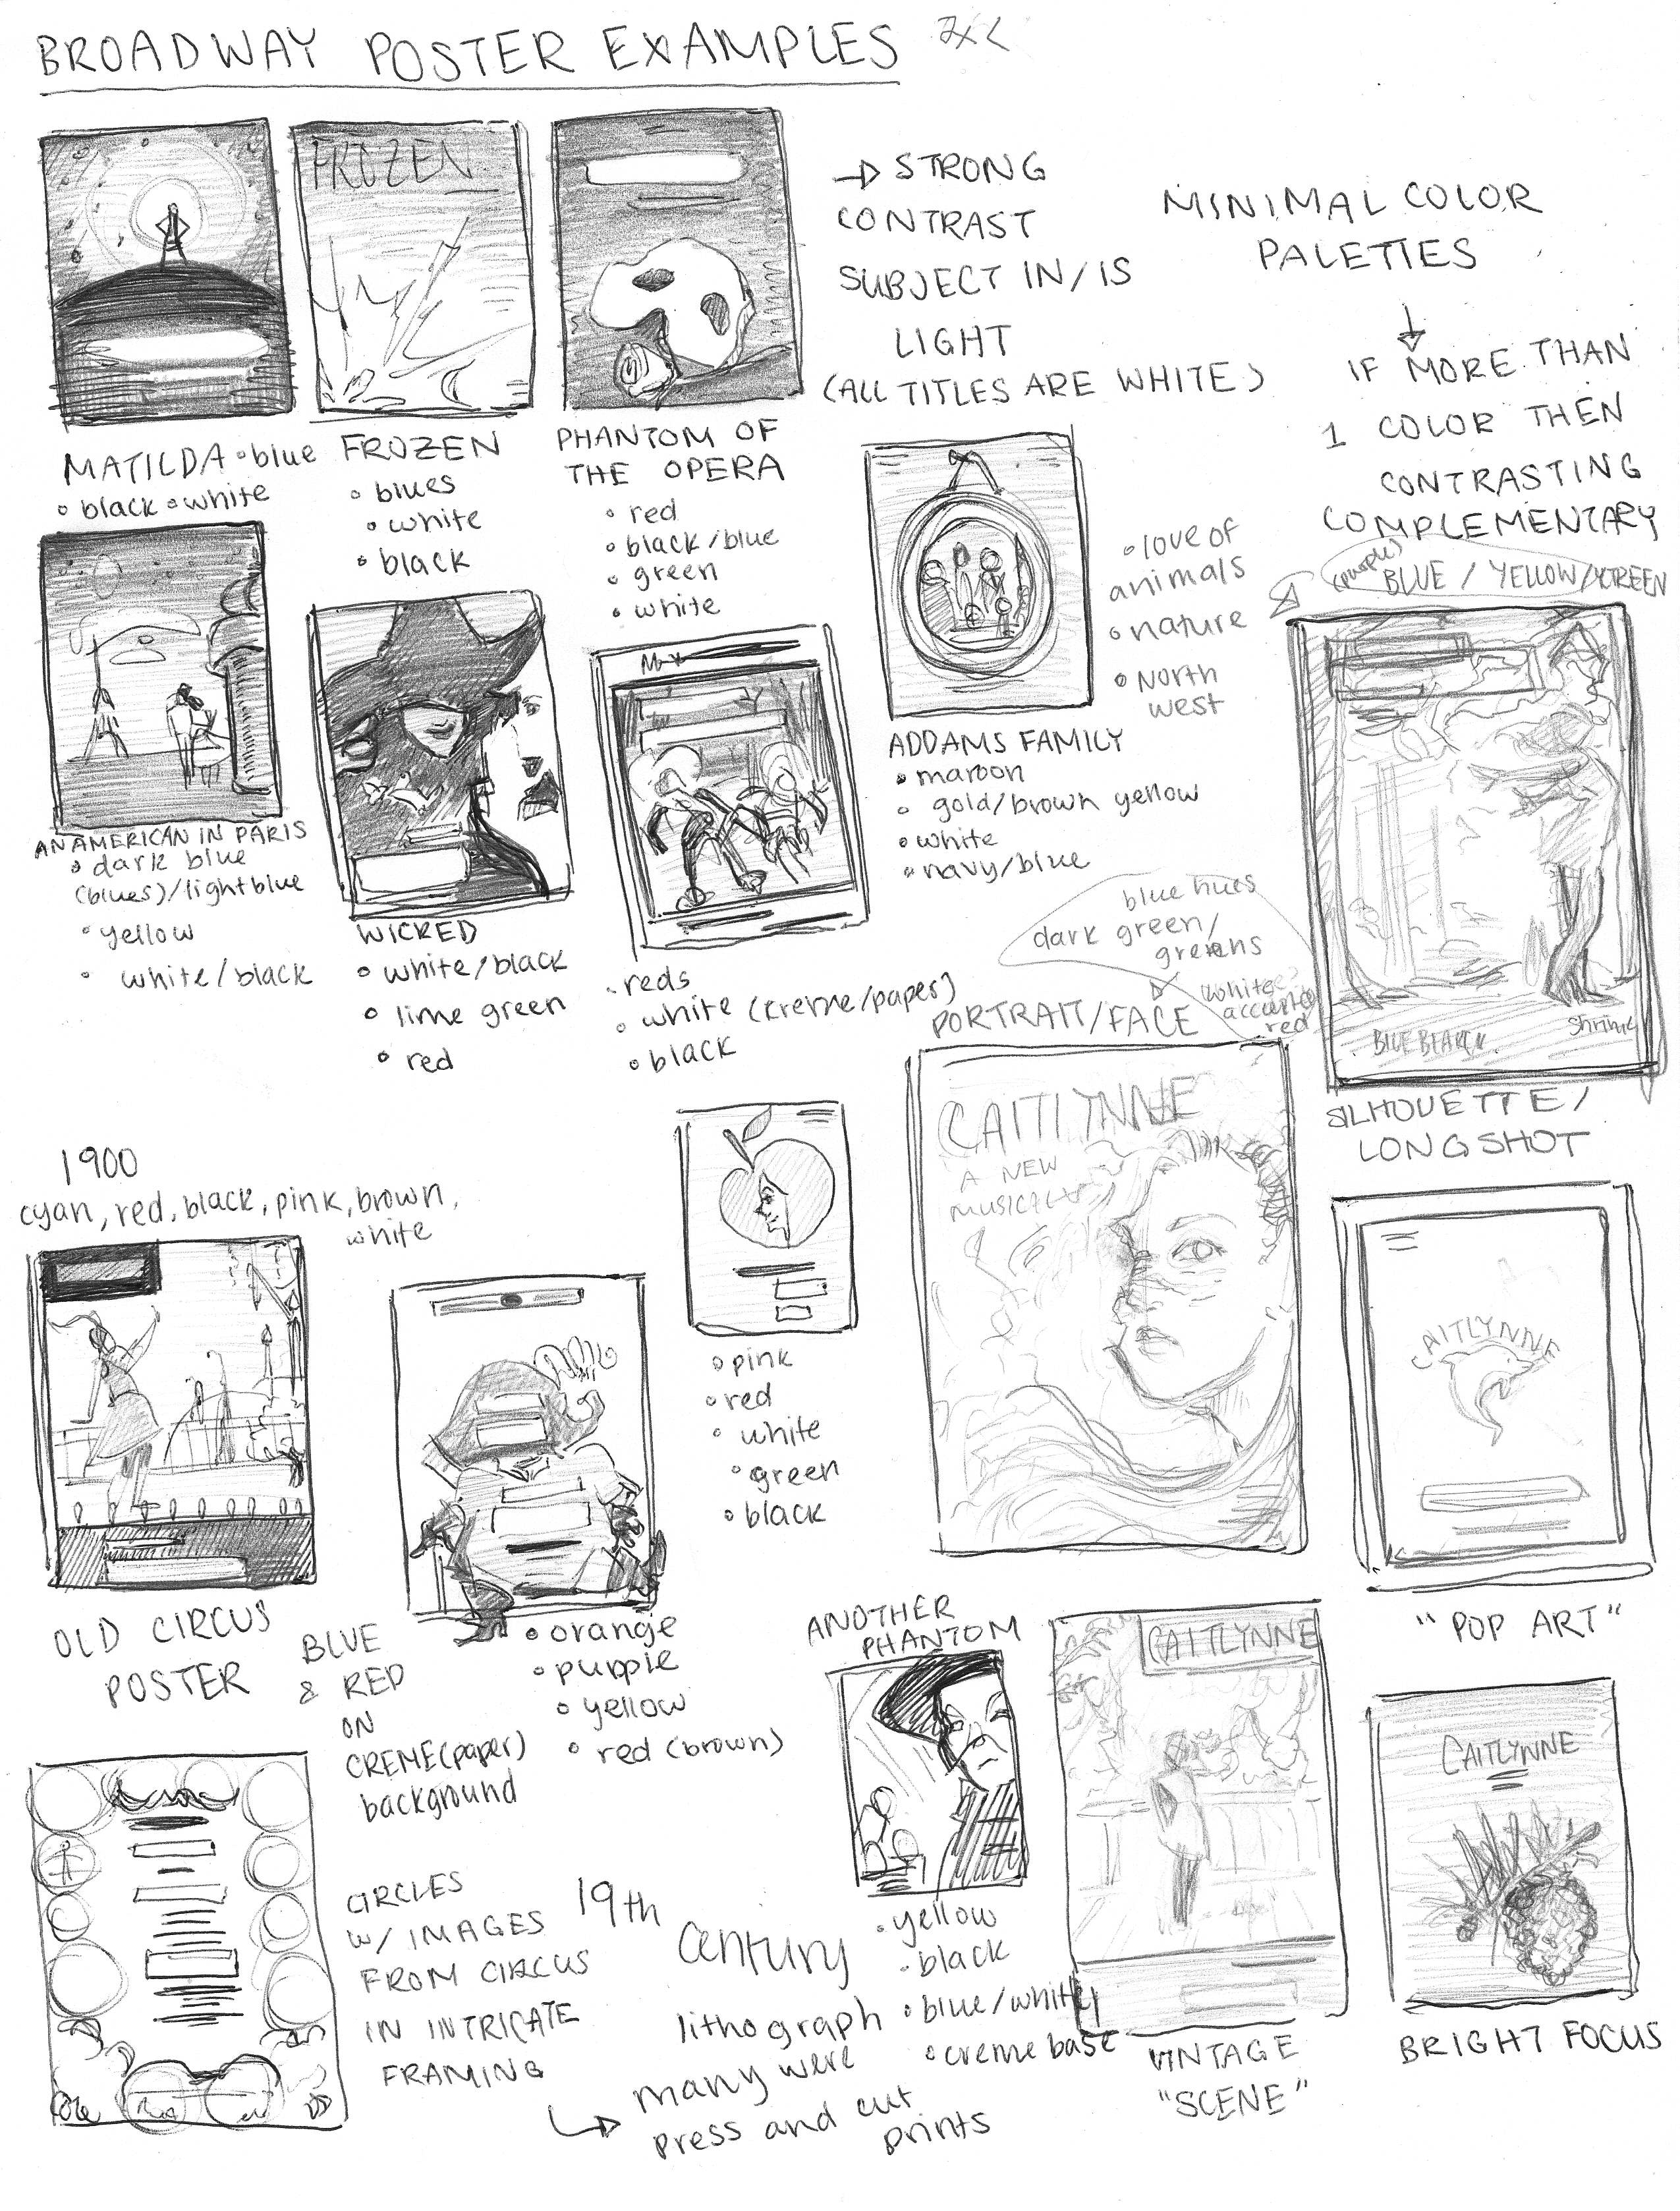 A collection of Broadway poster notes and thumbnails